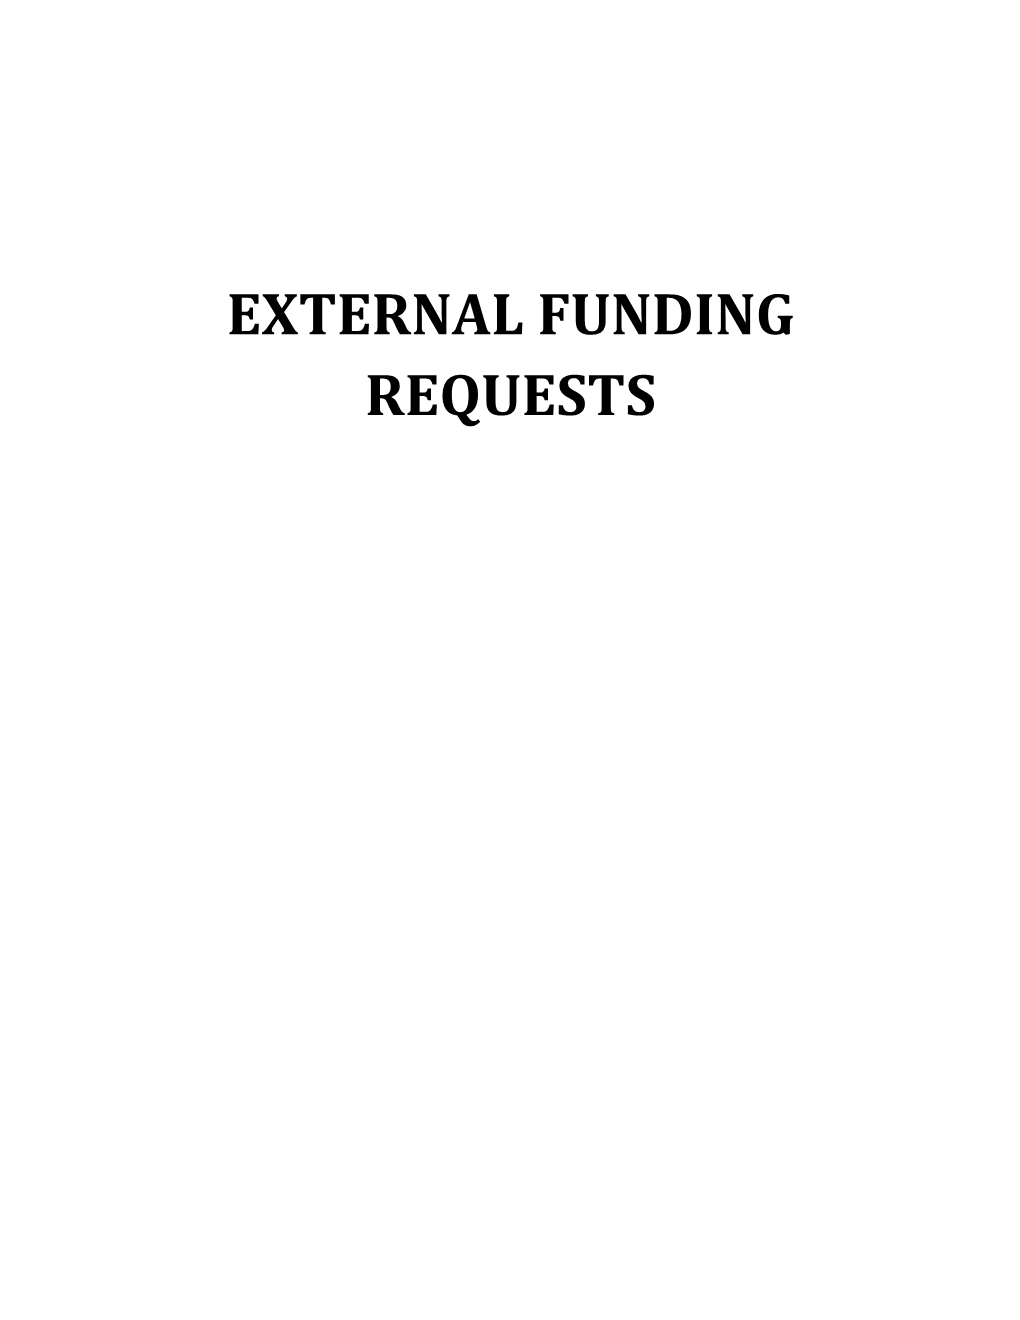 External Funding Requests